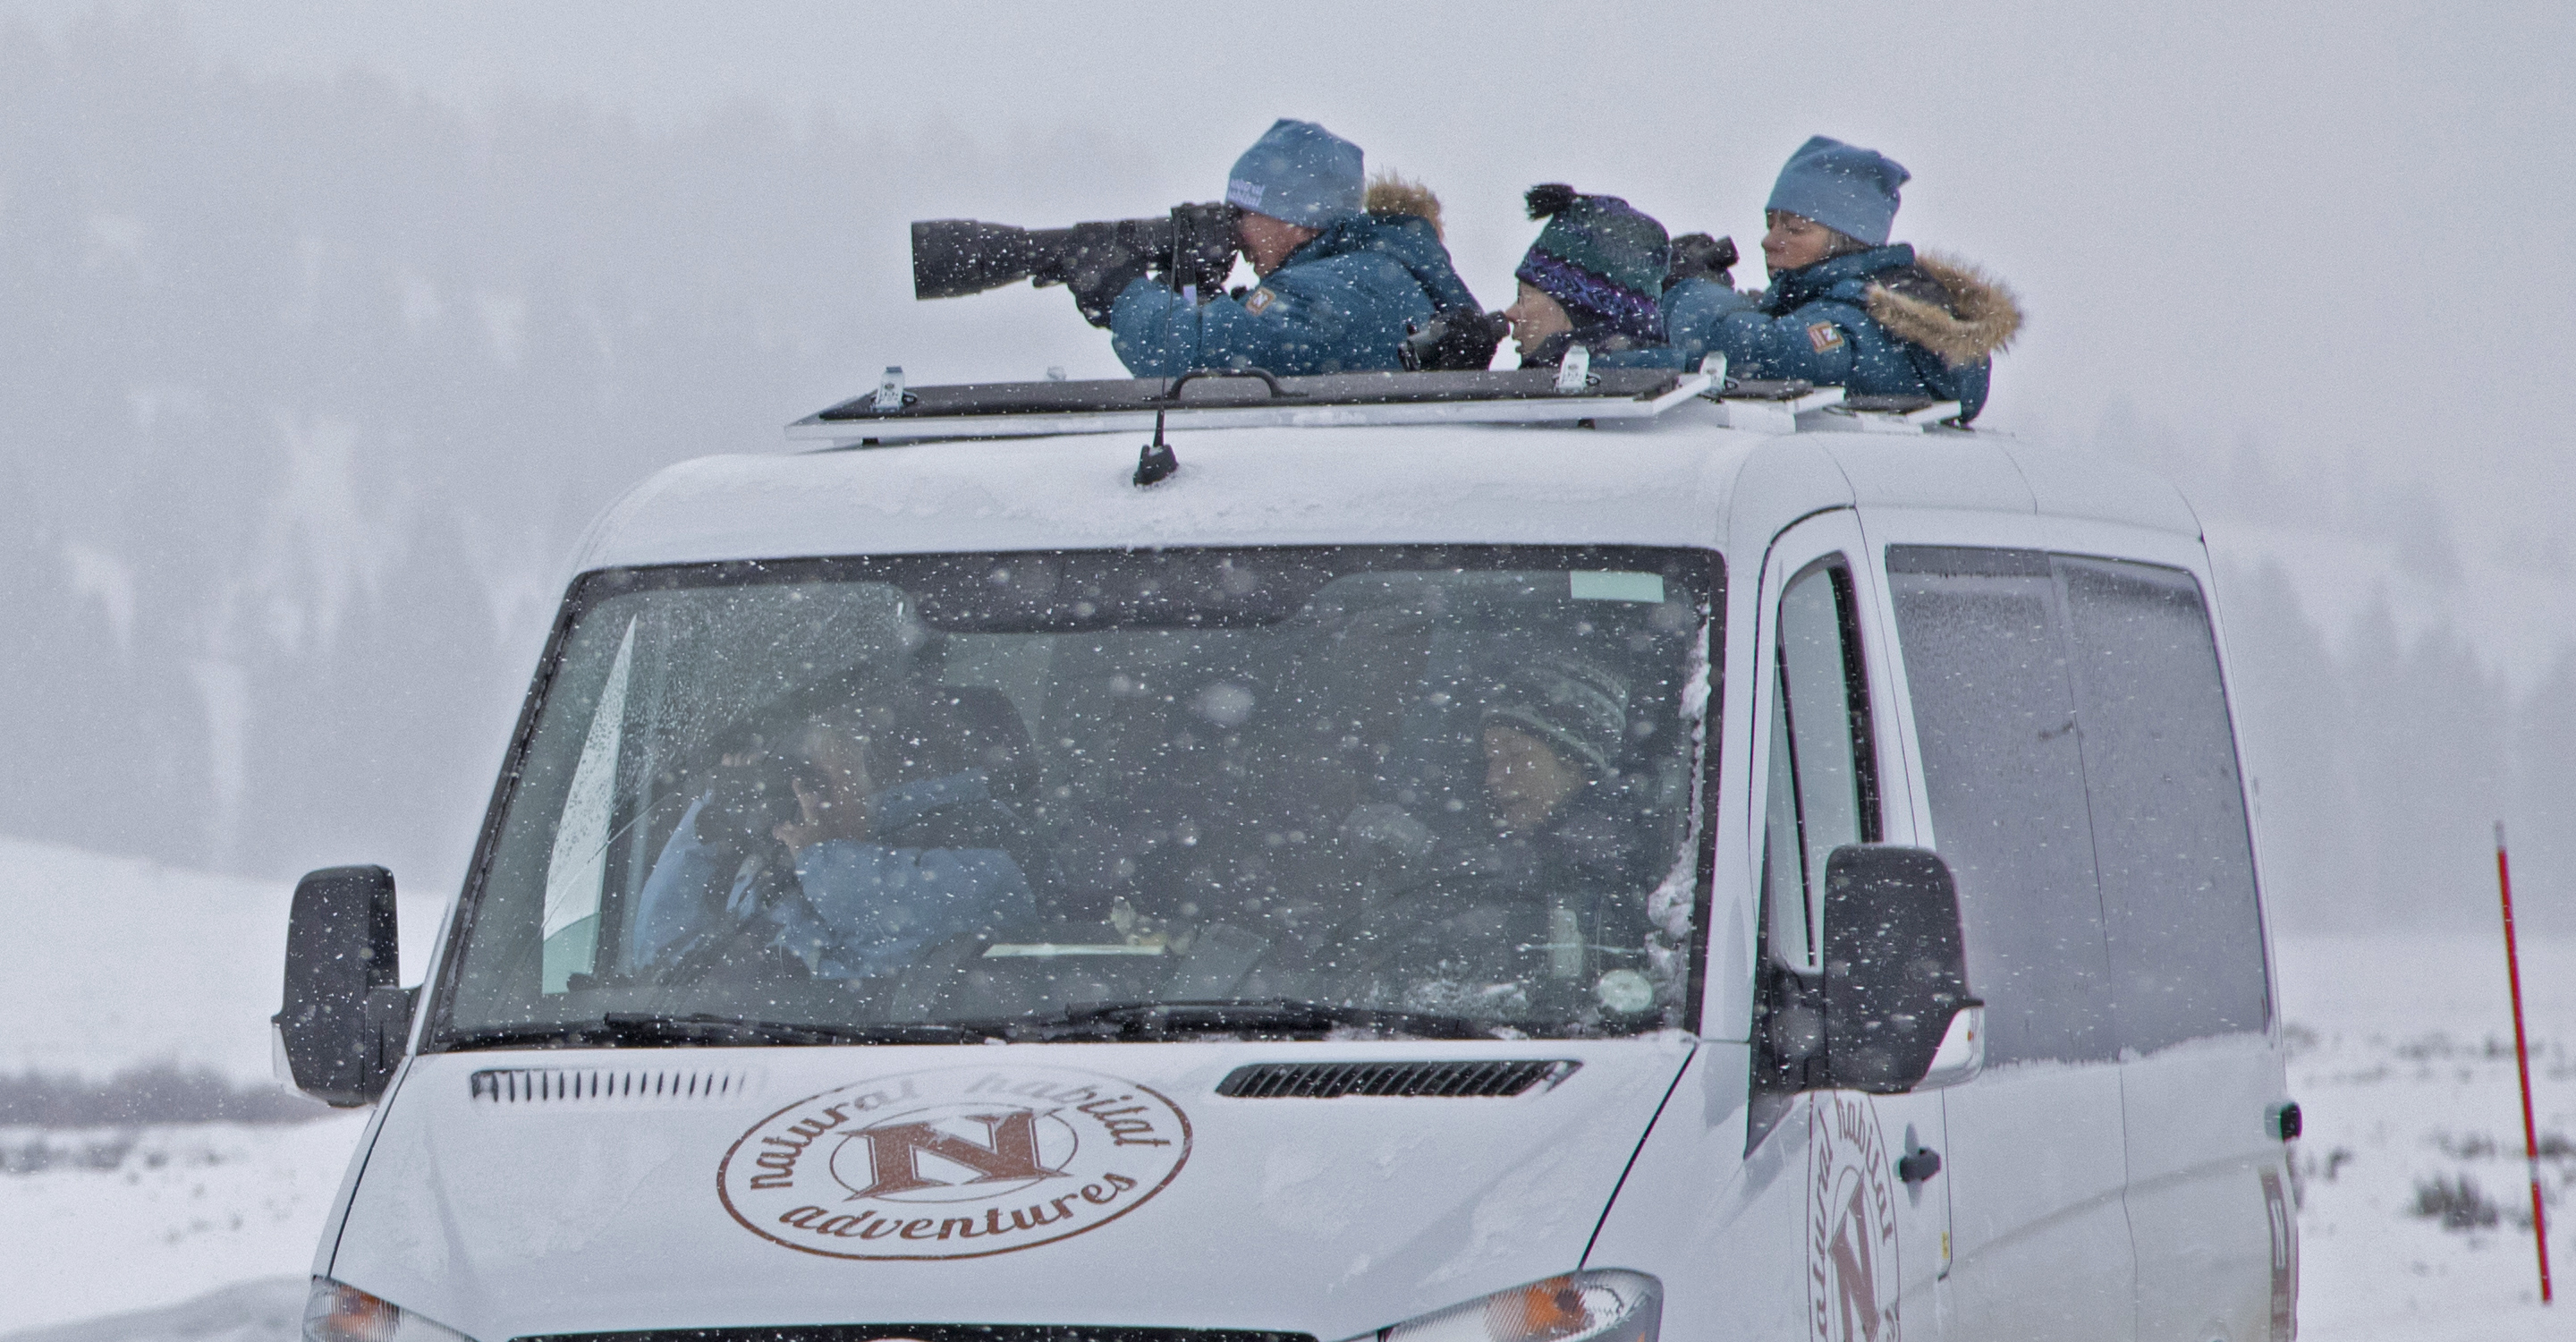 Natural Habitat Adventures travelers photograph wildlife from the Sprinter van in Yellowstone National Park, United States